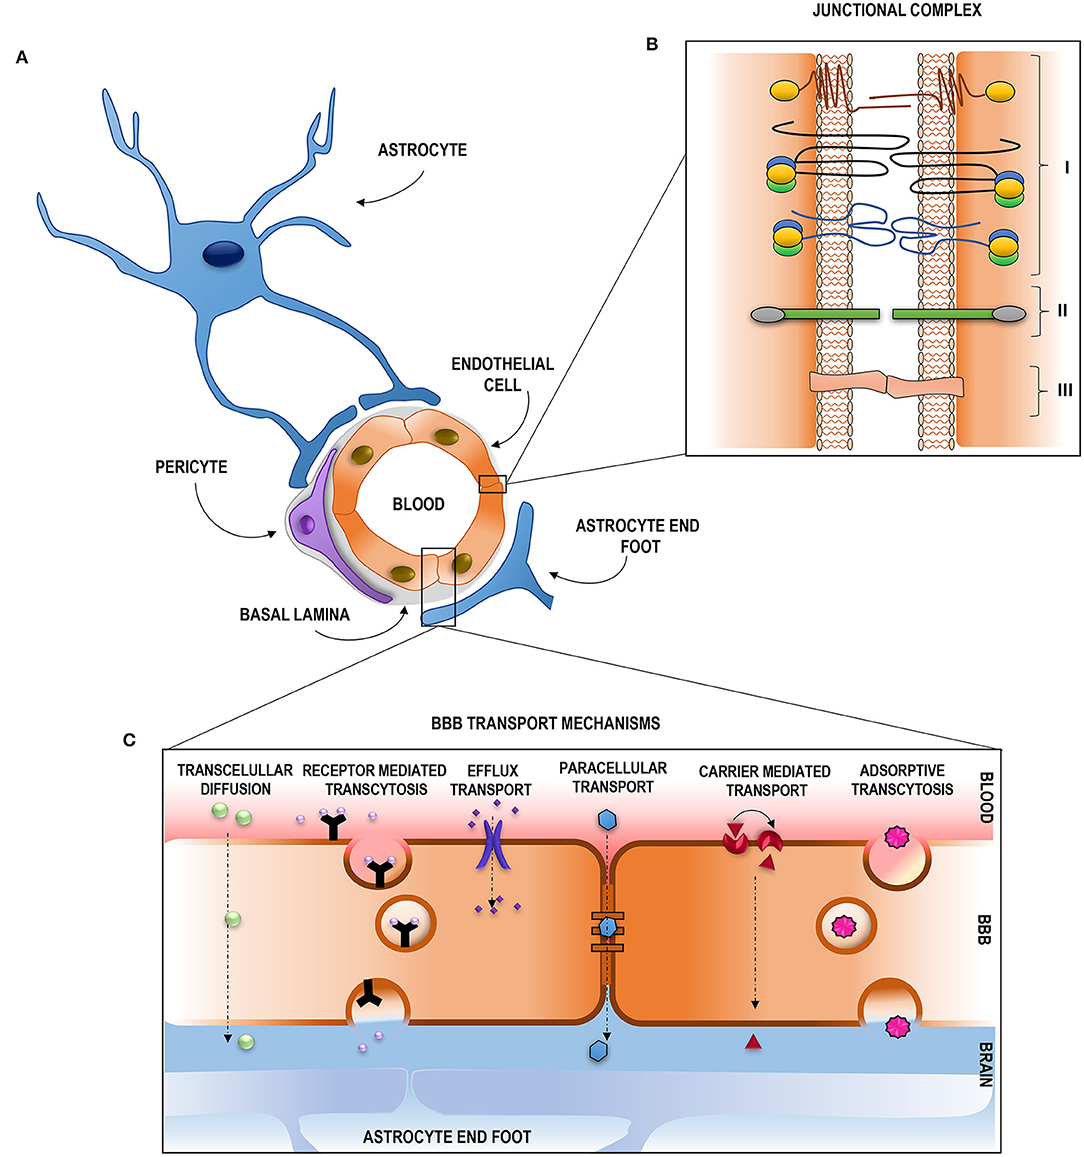 Sky eksekverbar Abe Frontiers | Pathophysiology of Blood–Brain Barrier Permeability Throughout  the Different Stages of Ischemic Stroke and Its Implication on Hemorrhagic  Transformation and Recovery | Neurology